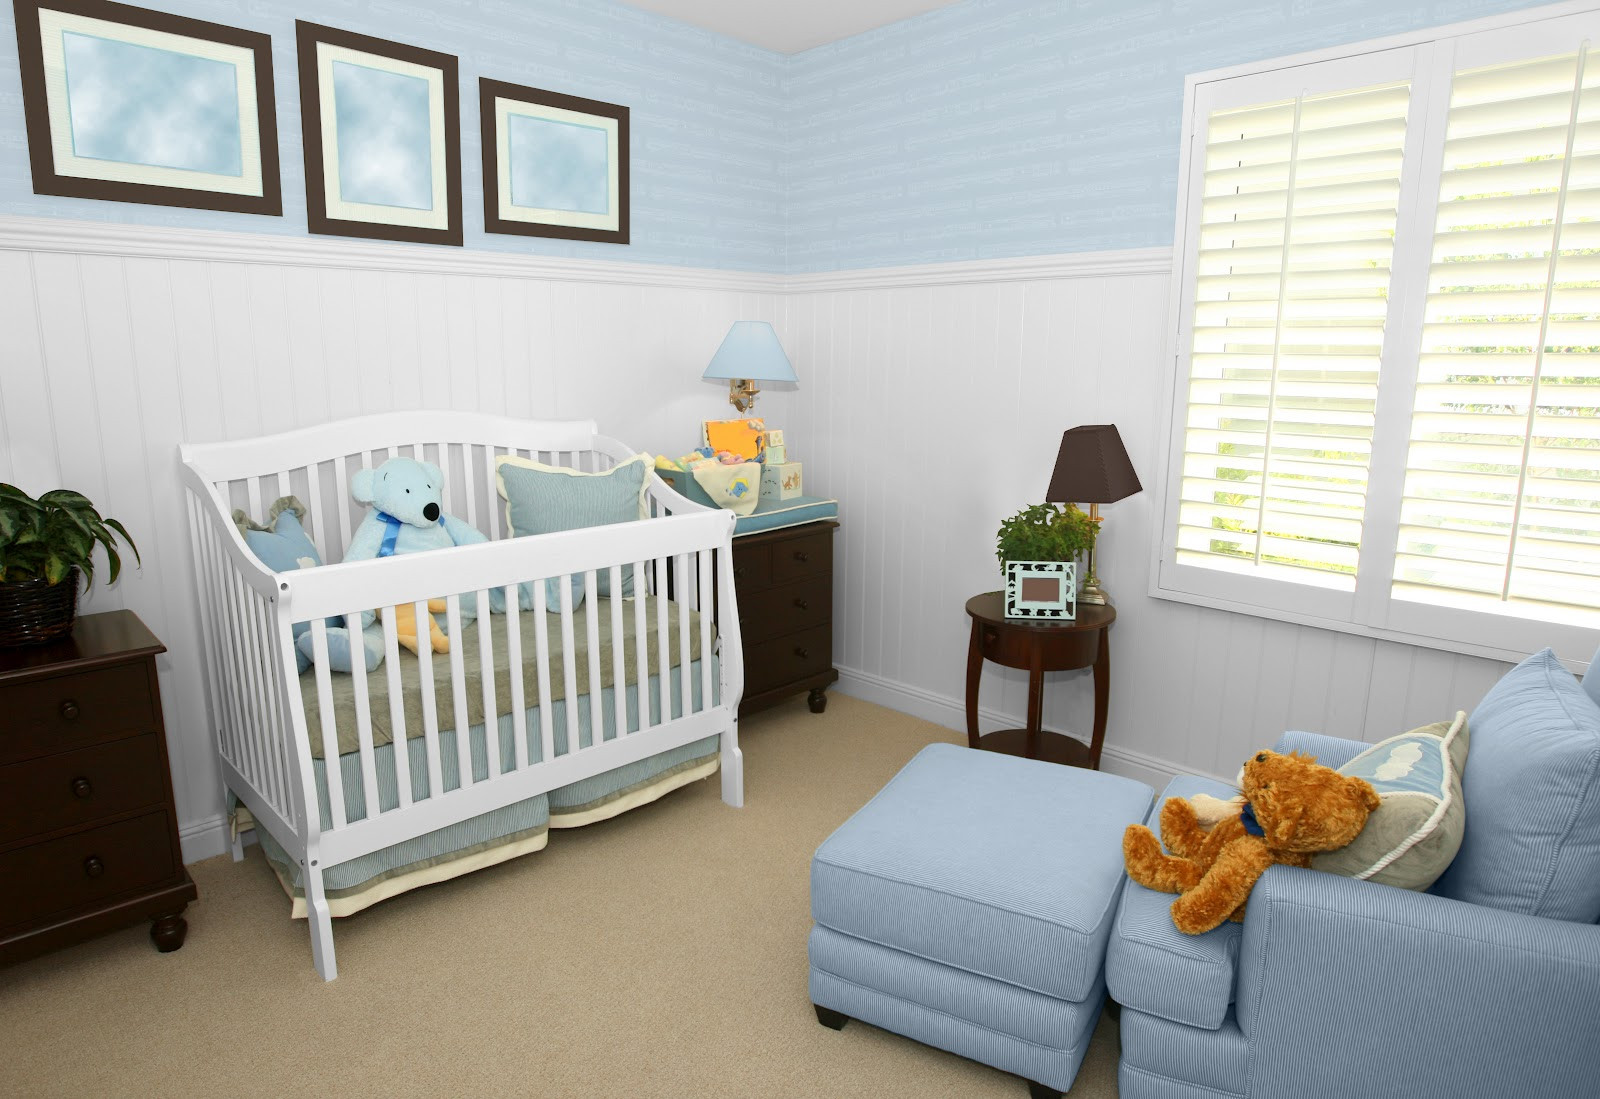 Decorating Baby Room
 Top 10 Baby Nursery Room Colors And Decorating Ideas